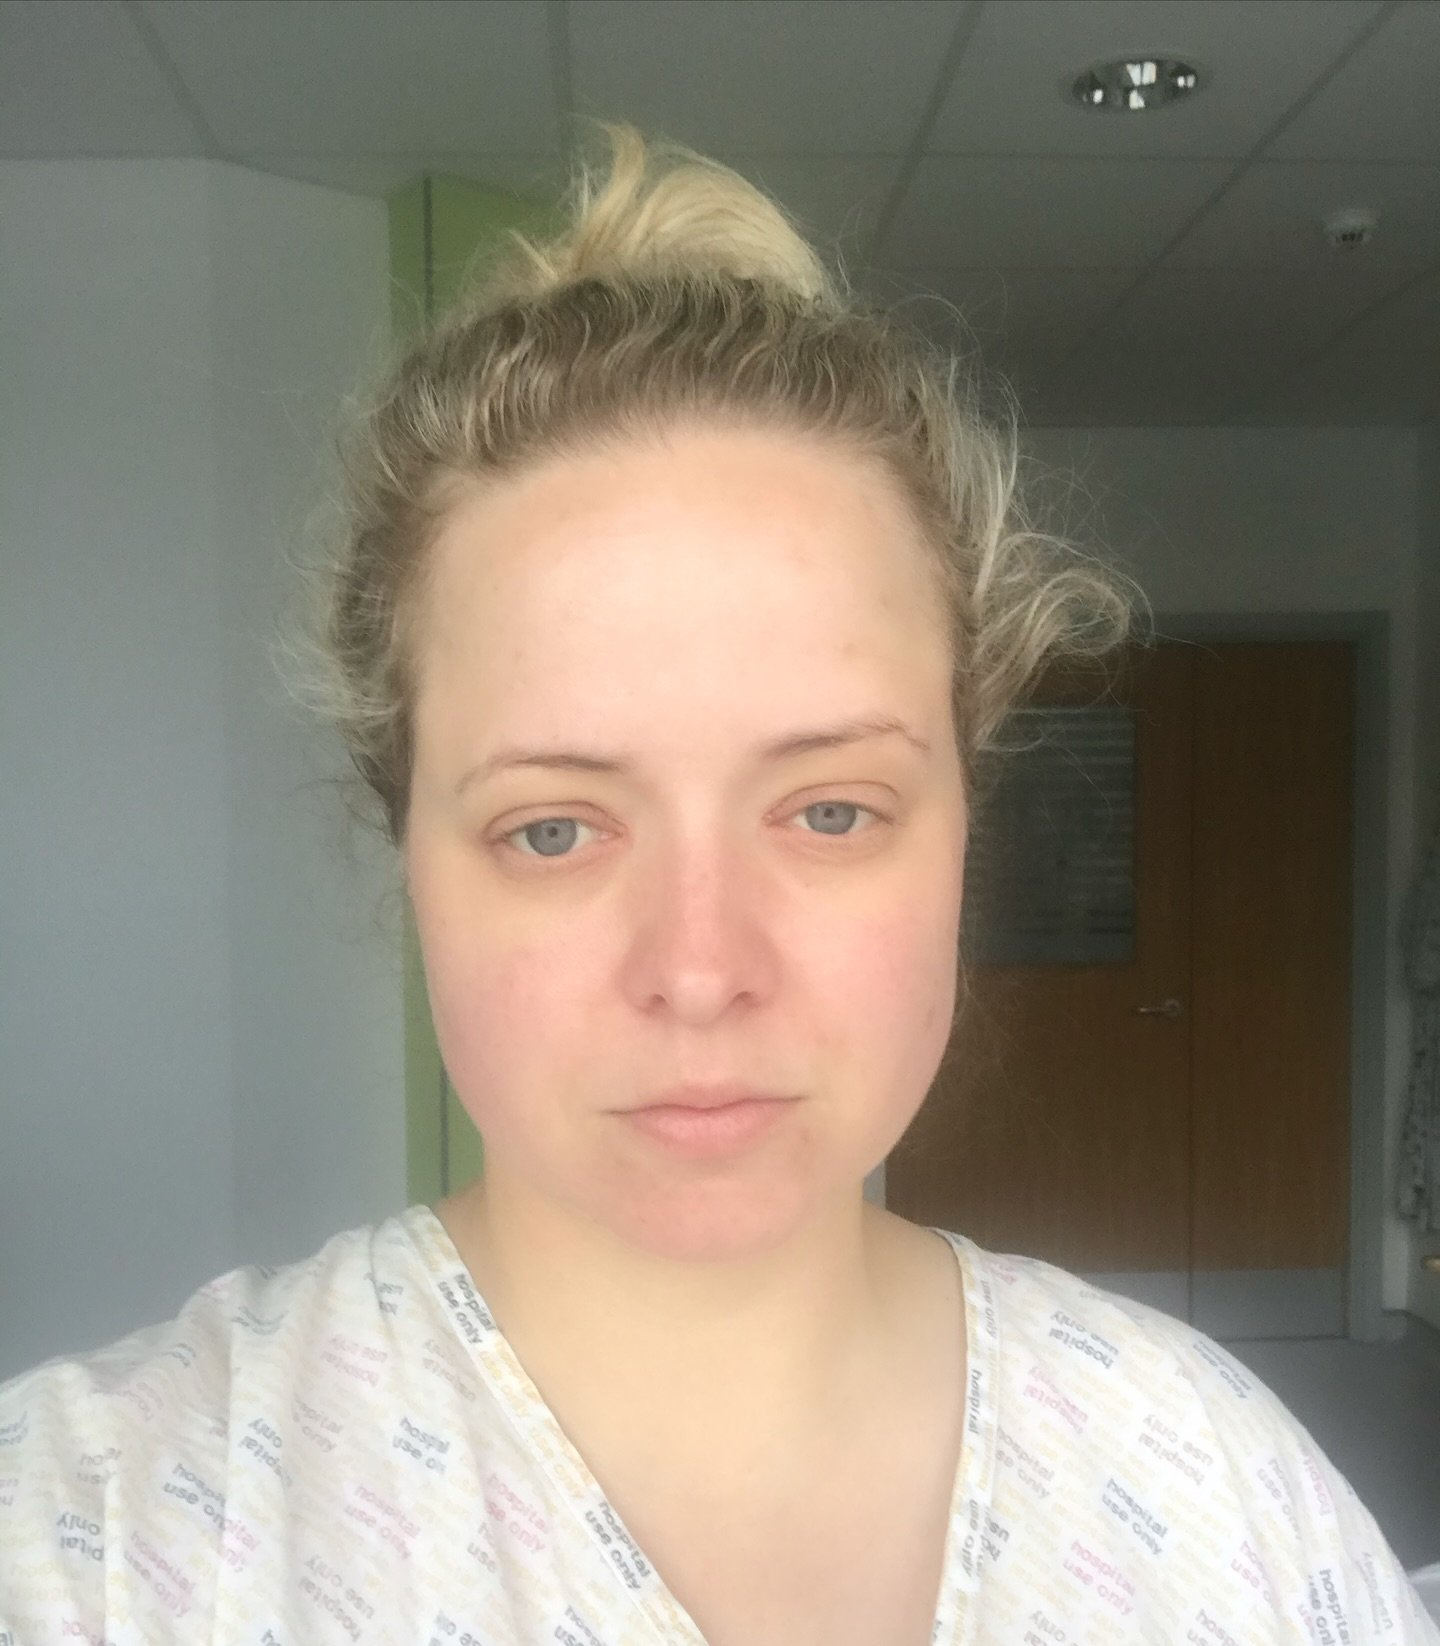 3 years ago today 📷 A selfie from Pembury Hospital after starting IV antibiotics for SEPSIS ⚡️Drs had no idea where the primary infection was and I was loosing the battle quickly. I was insistent that they keep communicating with my Cardiac Consulta